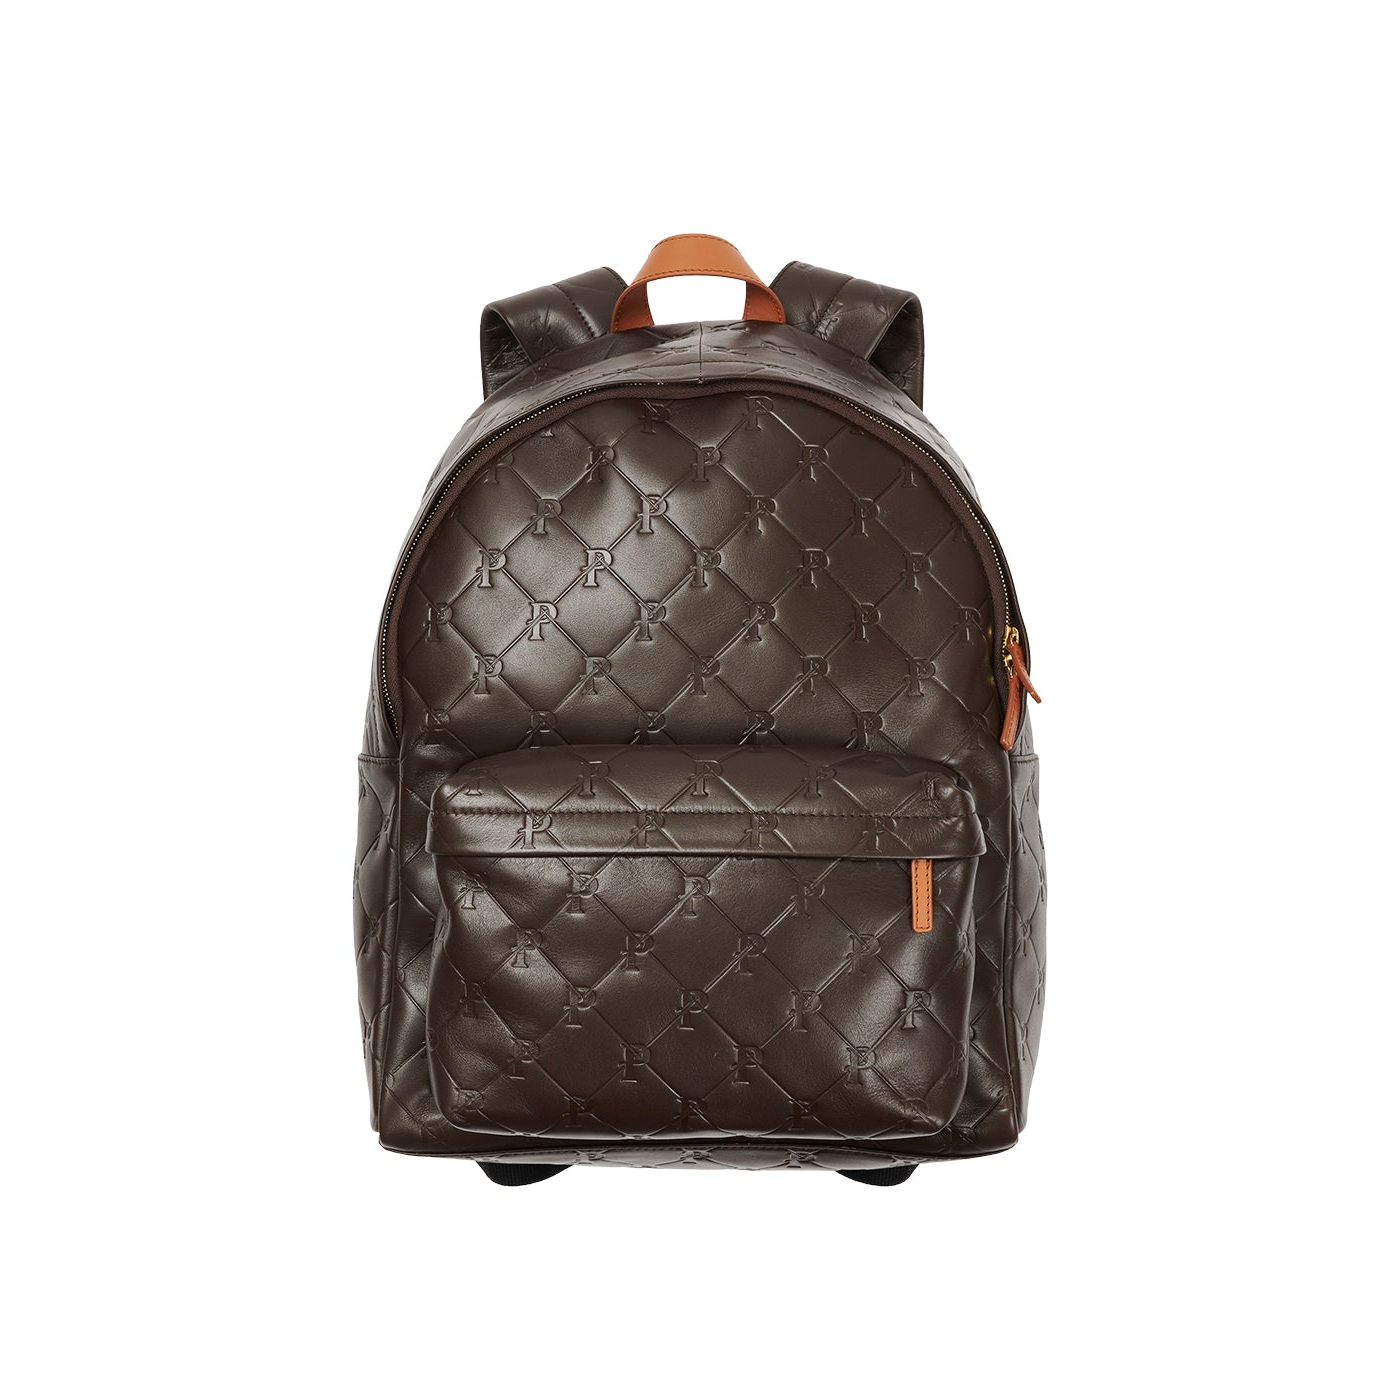 Thumbnail PAL-M-GRAM LEATHER BACKPACK BROWN one color